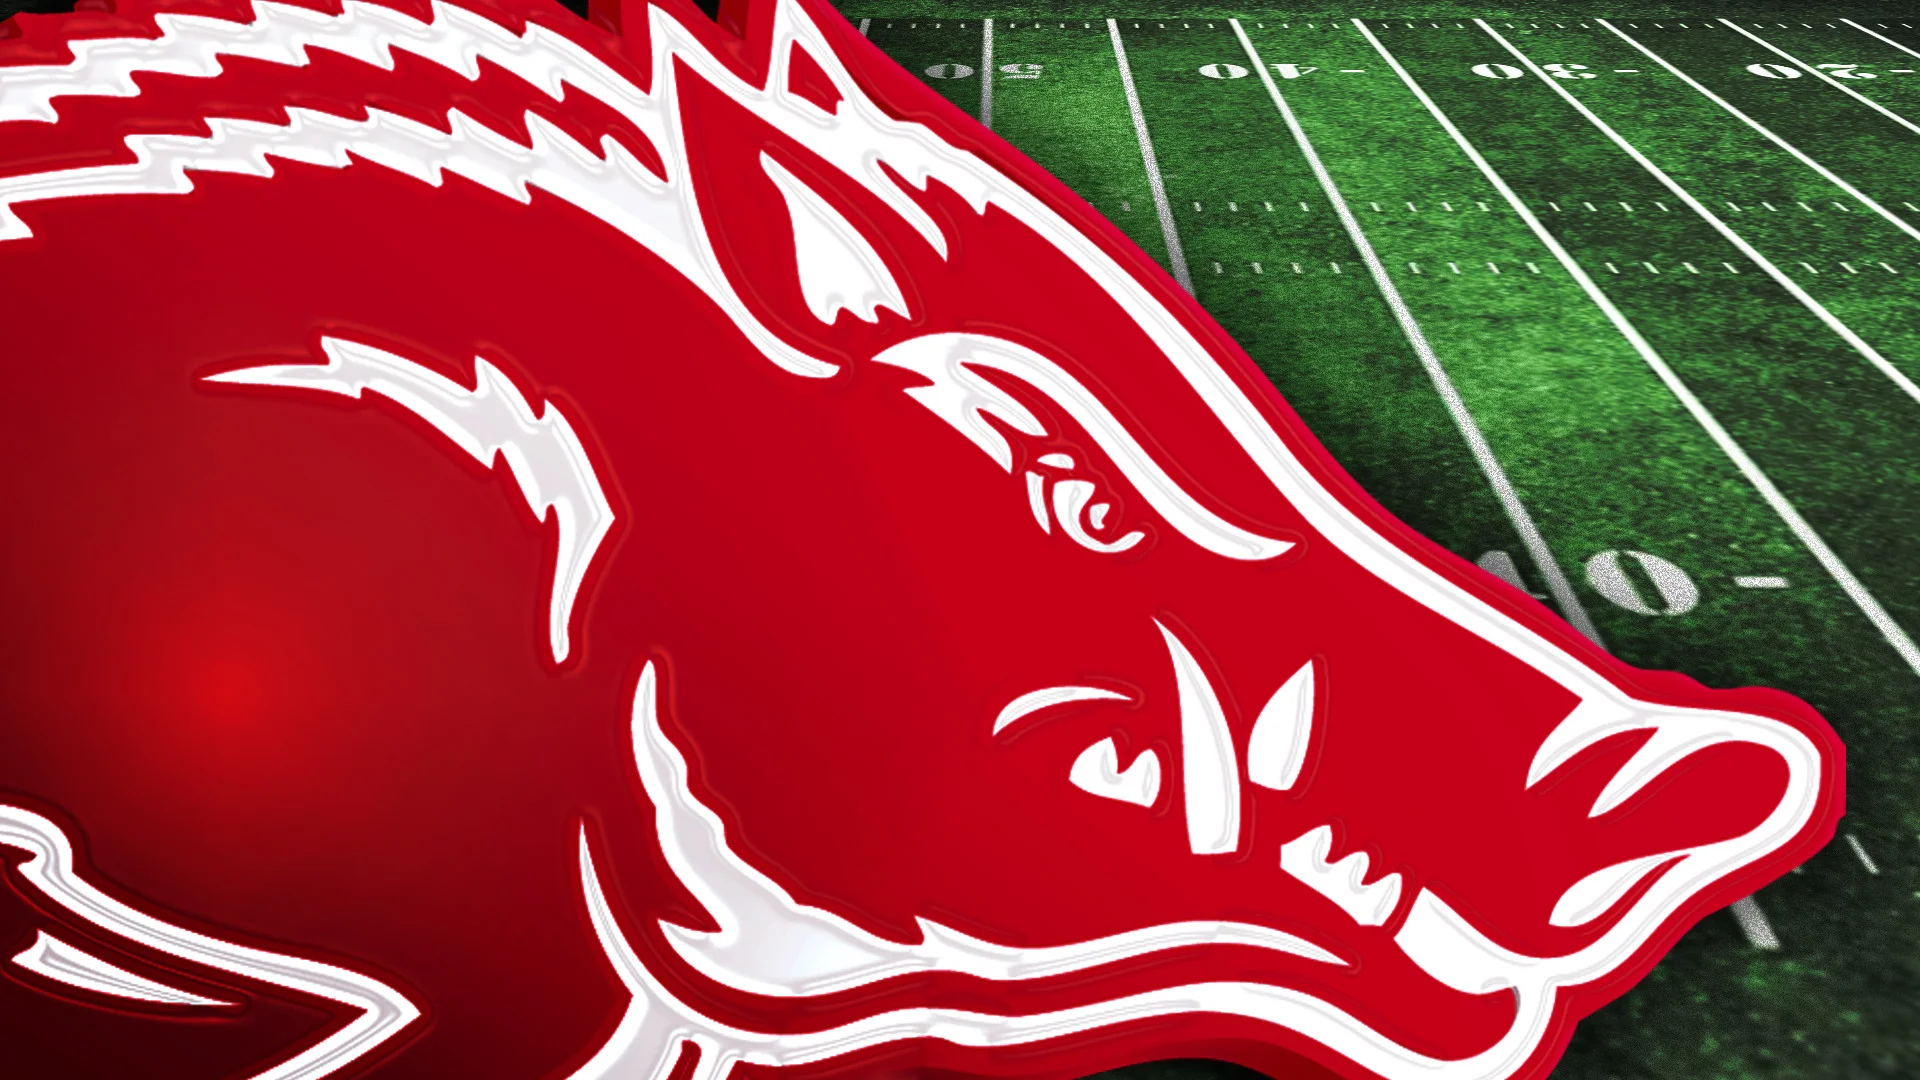 Arkansas Razorback Football a Twitter Get your phones right with some  fresh wallpapers  httpstco9QDXM9Z5SQ  Twitter